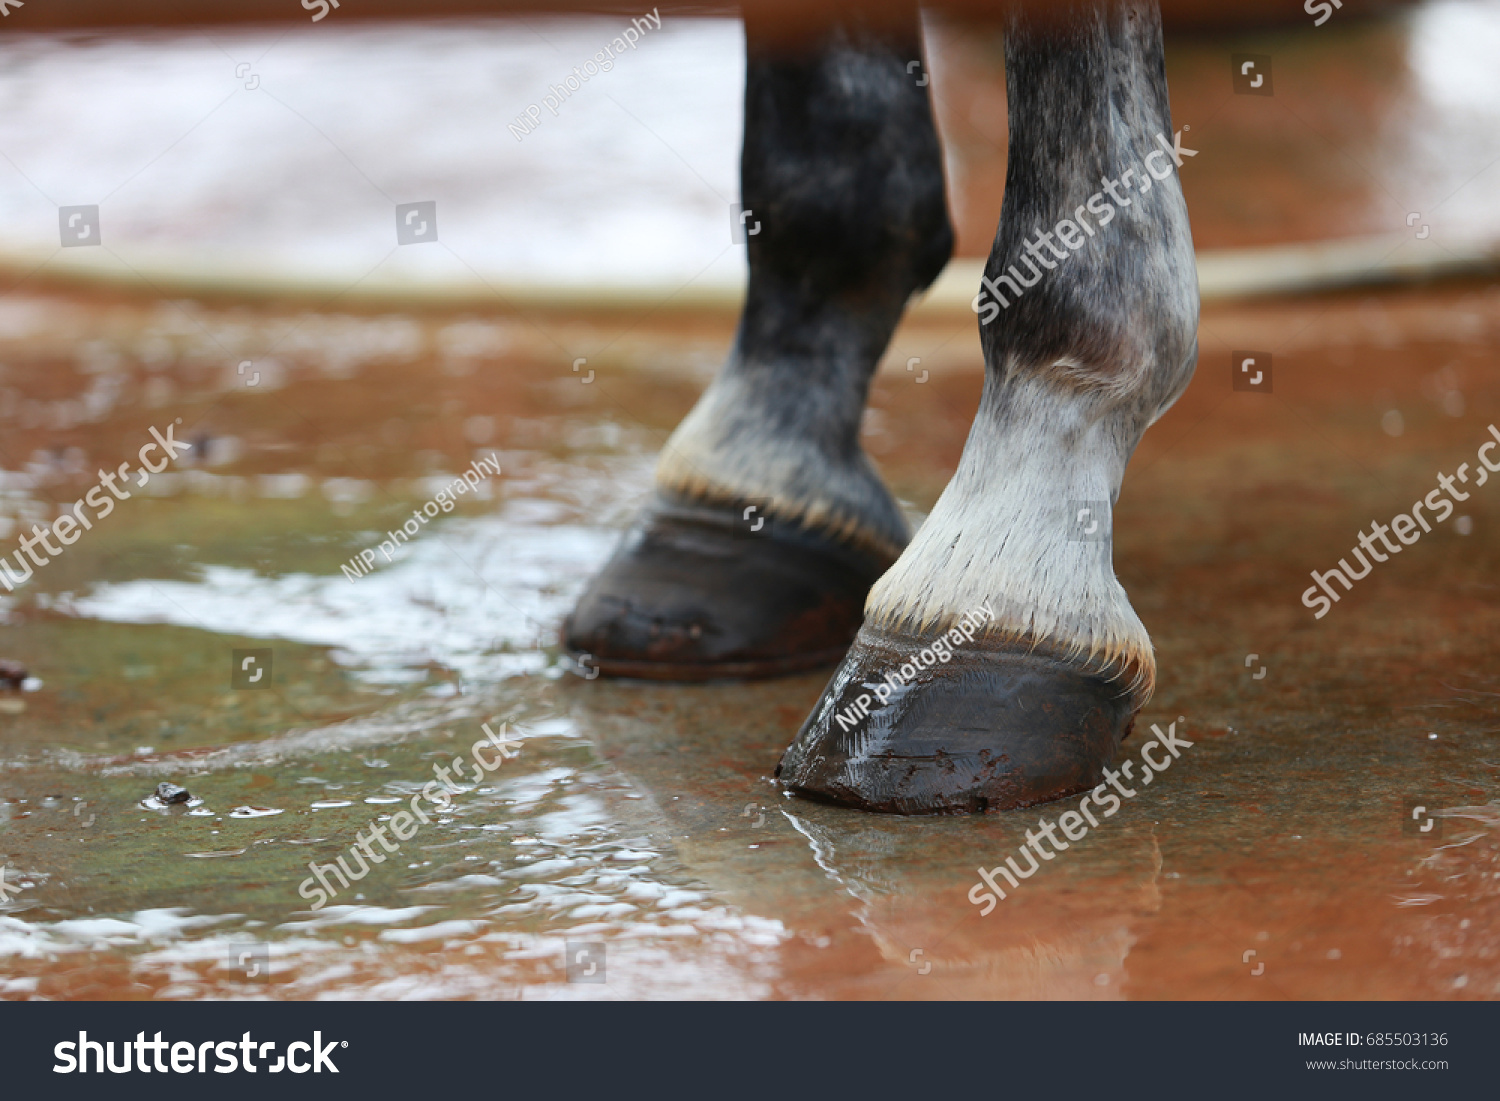 Close up of a horse's hooves. #685503136